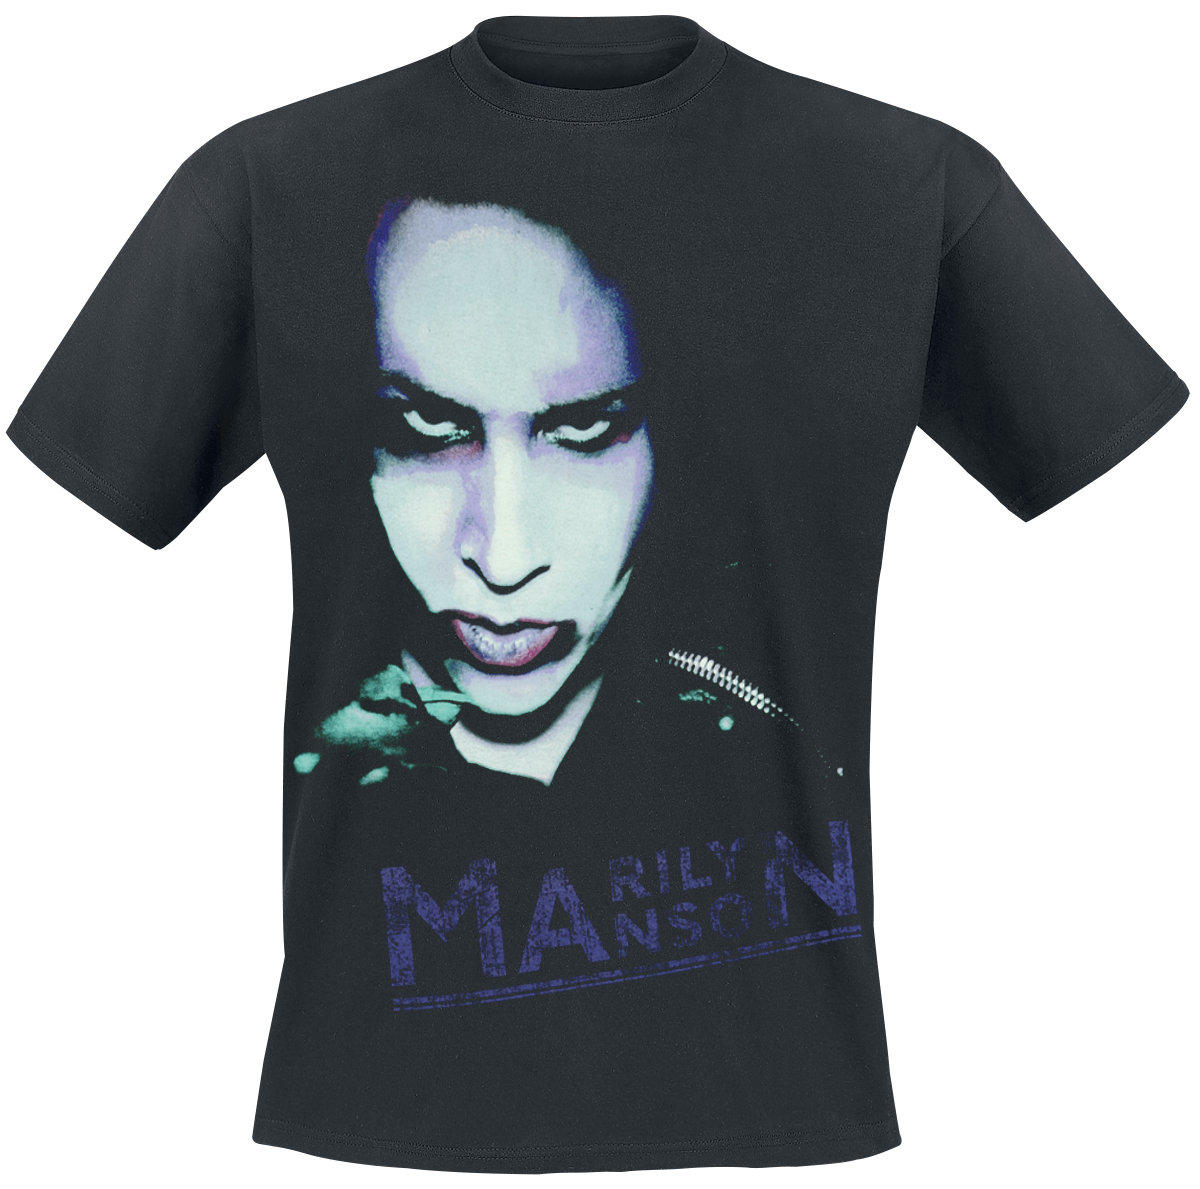 Marilyn Manson - Oversaturated Photo - T-Shirt - black image